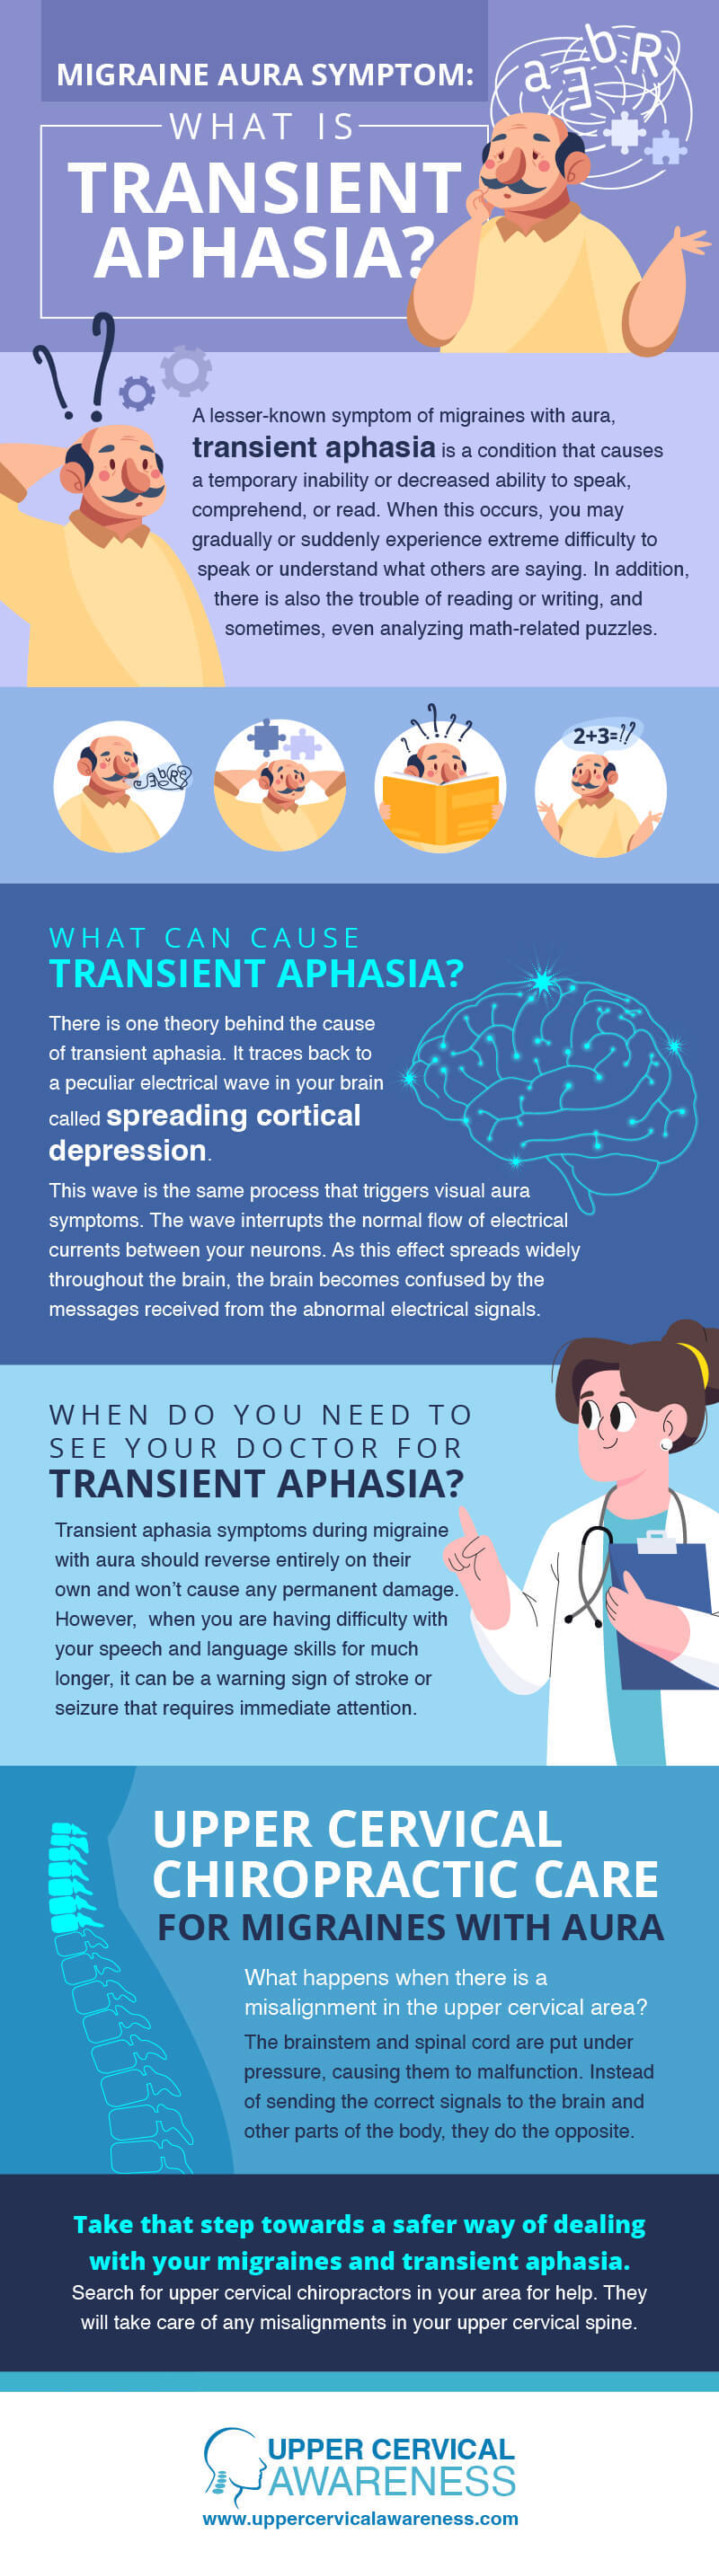 transient aphasia relief in Spring Lake Park, migraine relief infographic